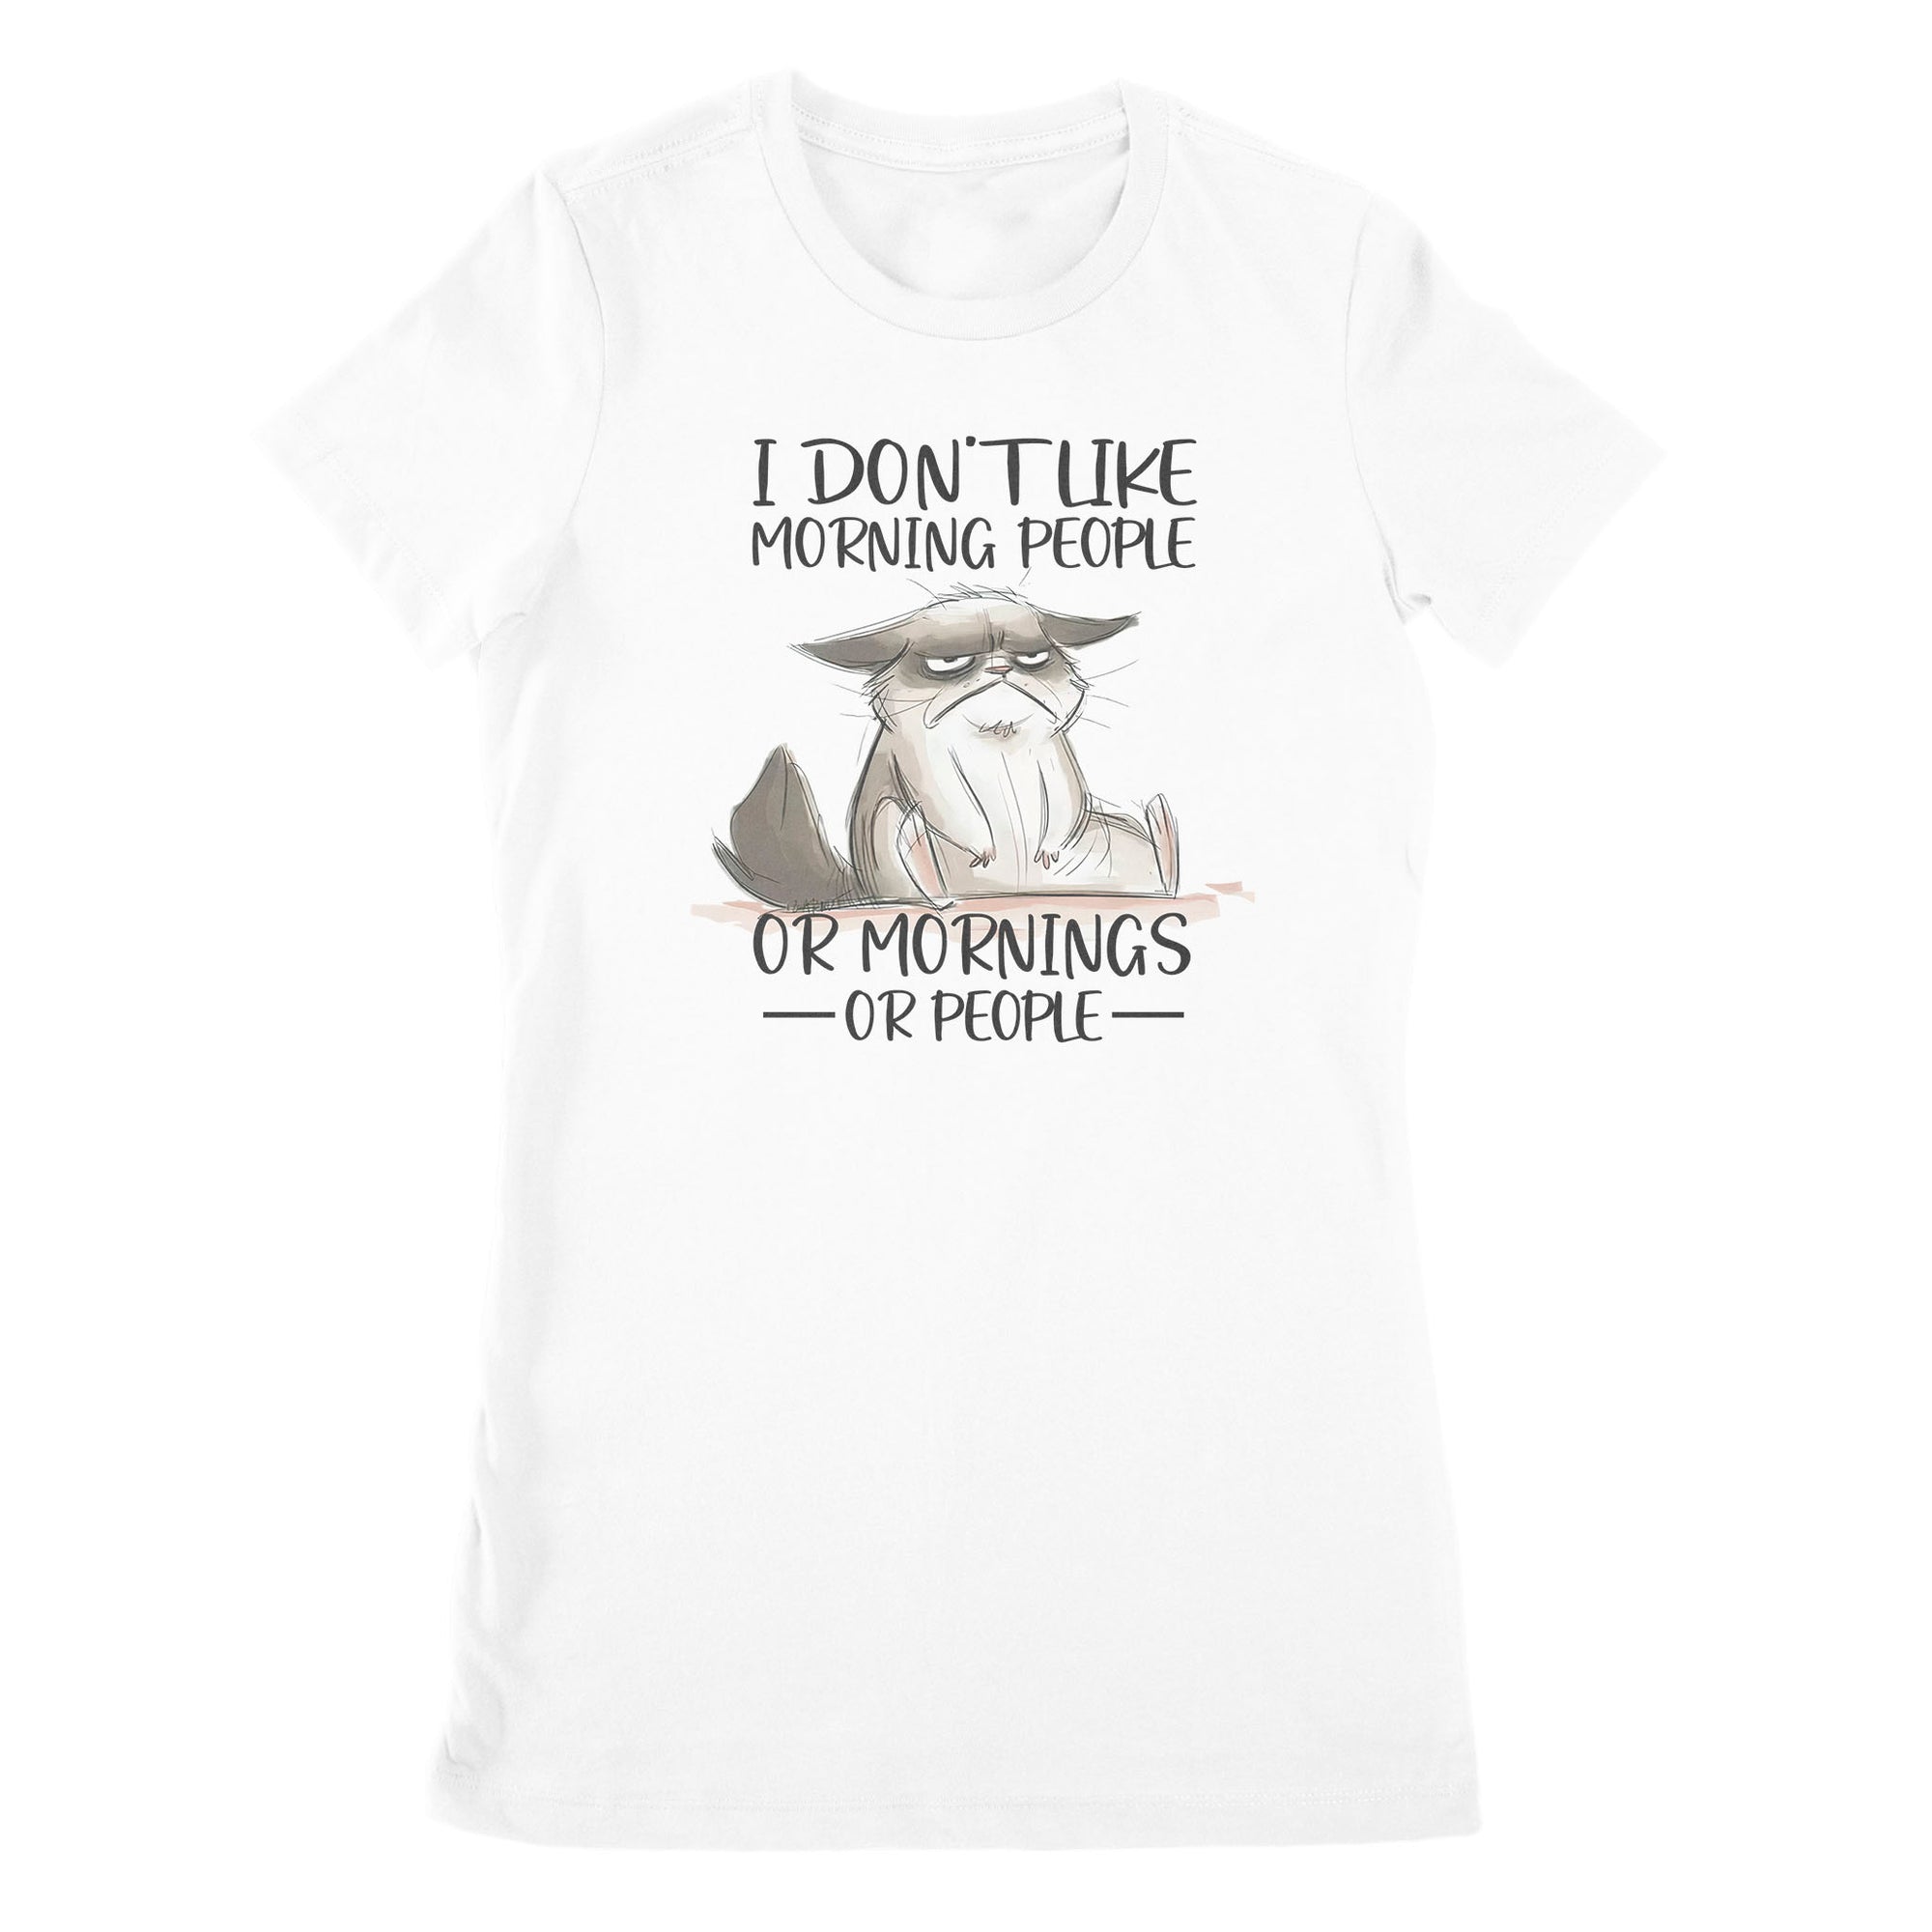 Premium Women's T-shirt - I Don’t Like Morning People Or Mornings Or People Cat